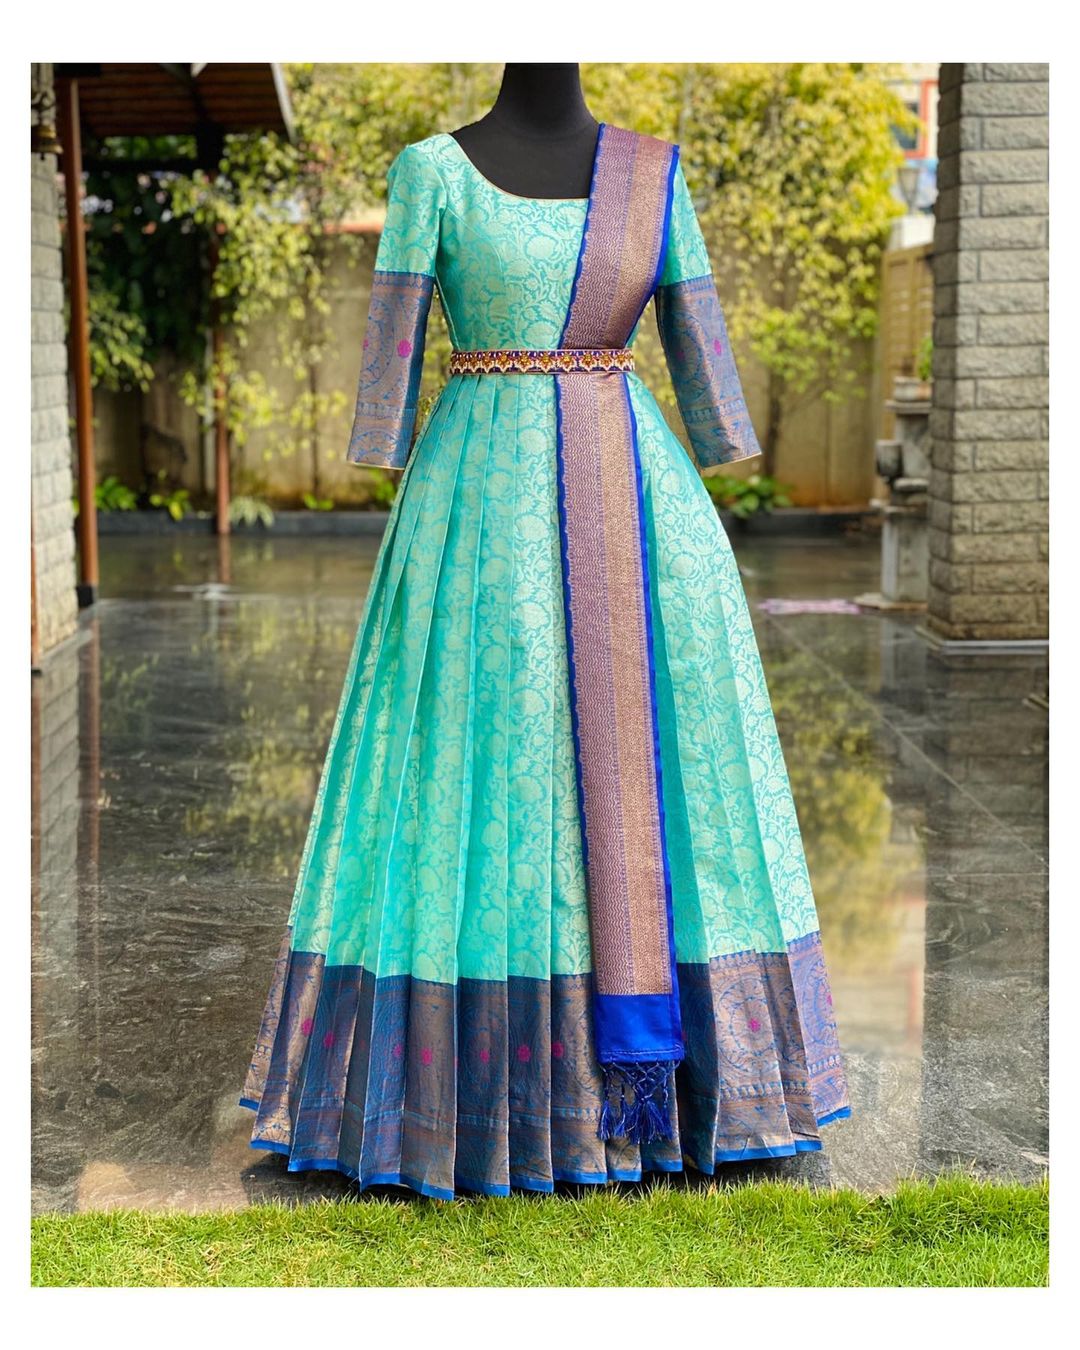 Grab New Year & Wedding Ethnic Wear with limited 50% off Sale